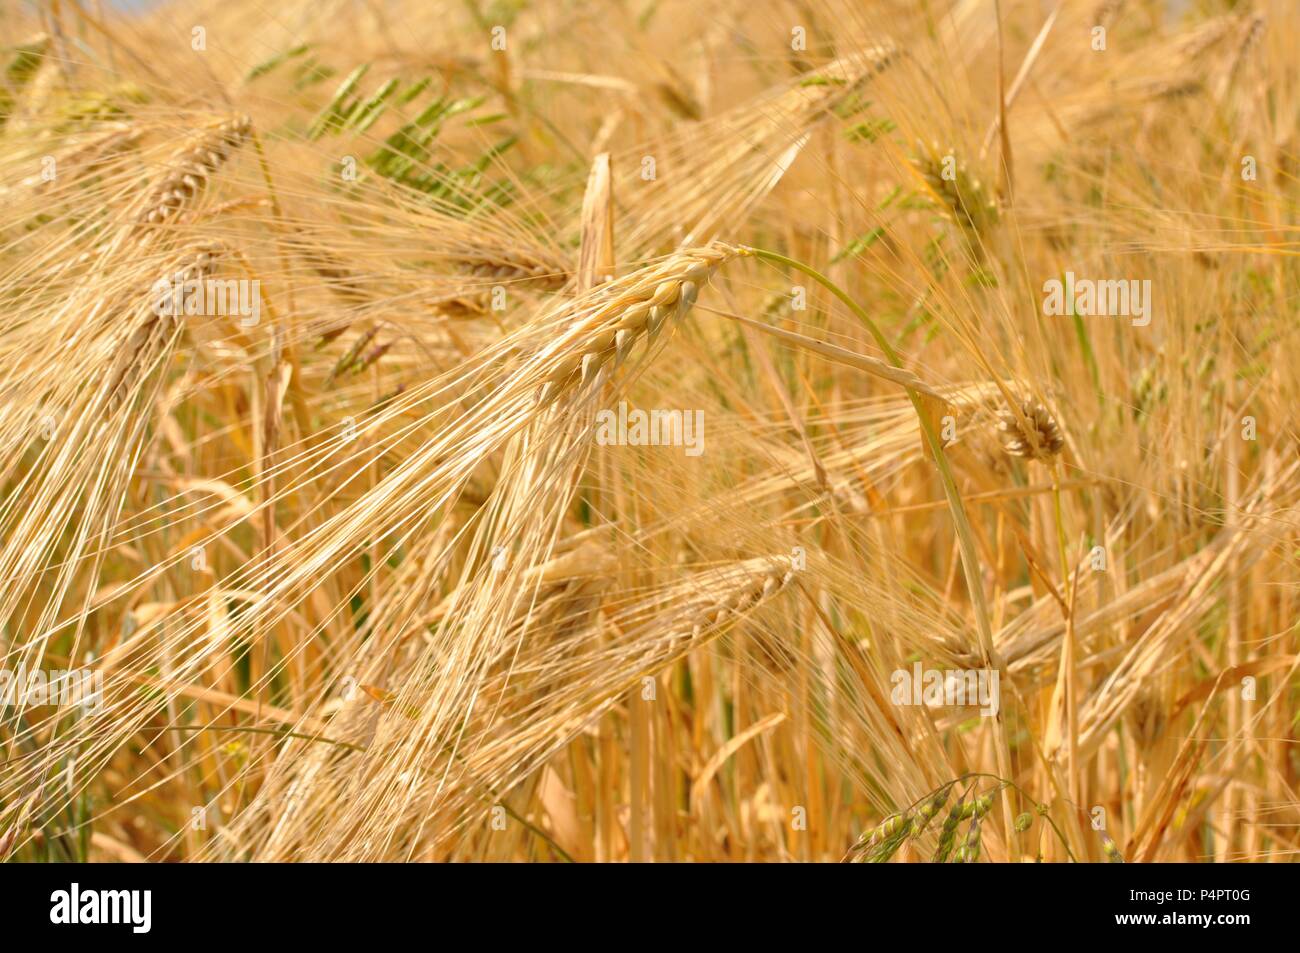 Closeup of golden wheat ear with stem in a field, viewed from above Stock Photo